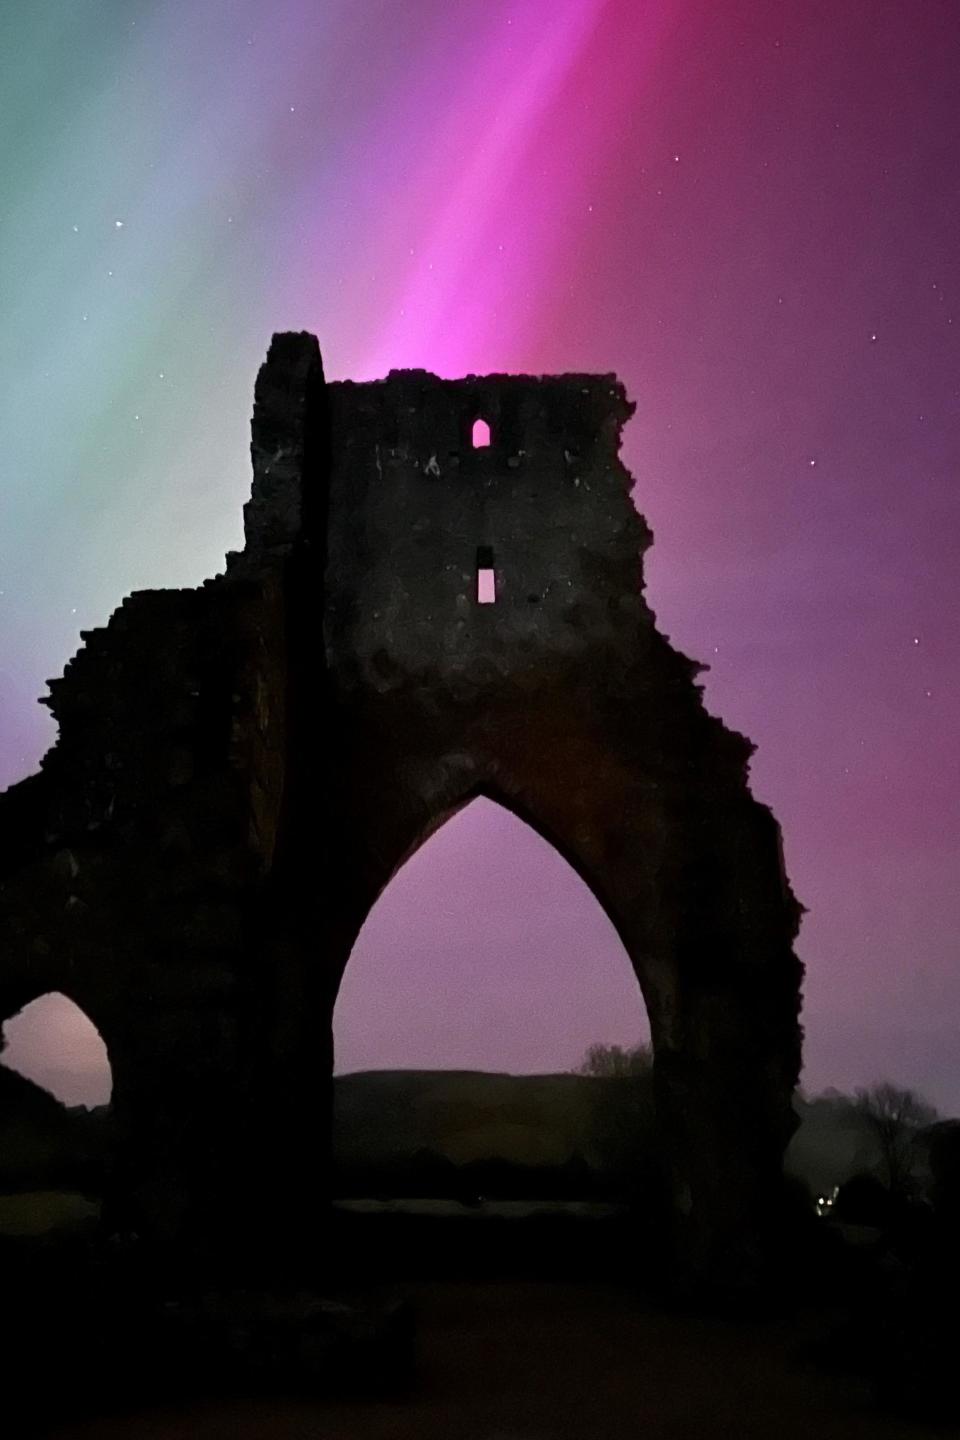 Castel ruins silhouetted against pinkish hues